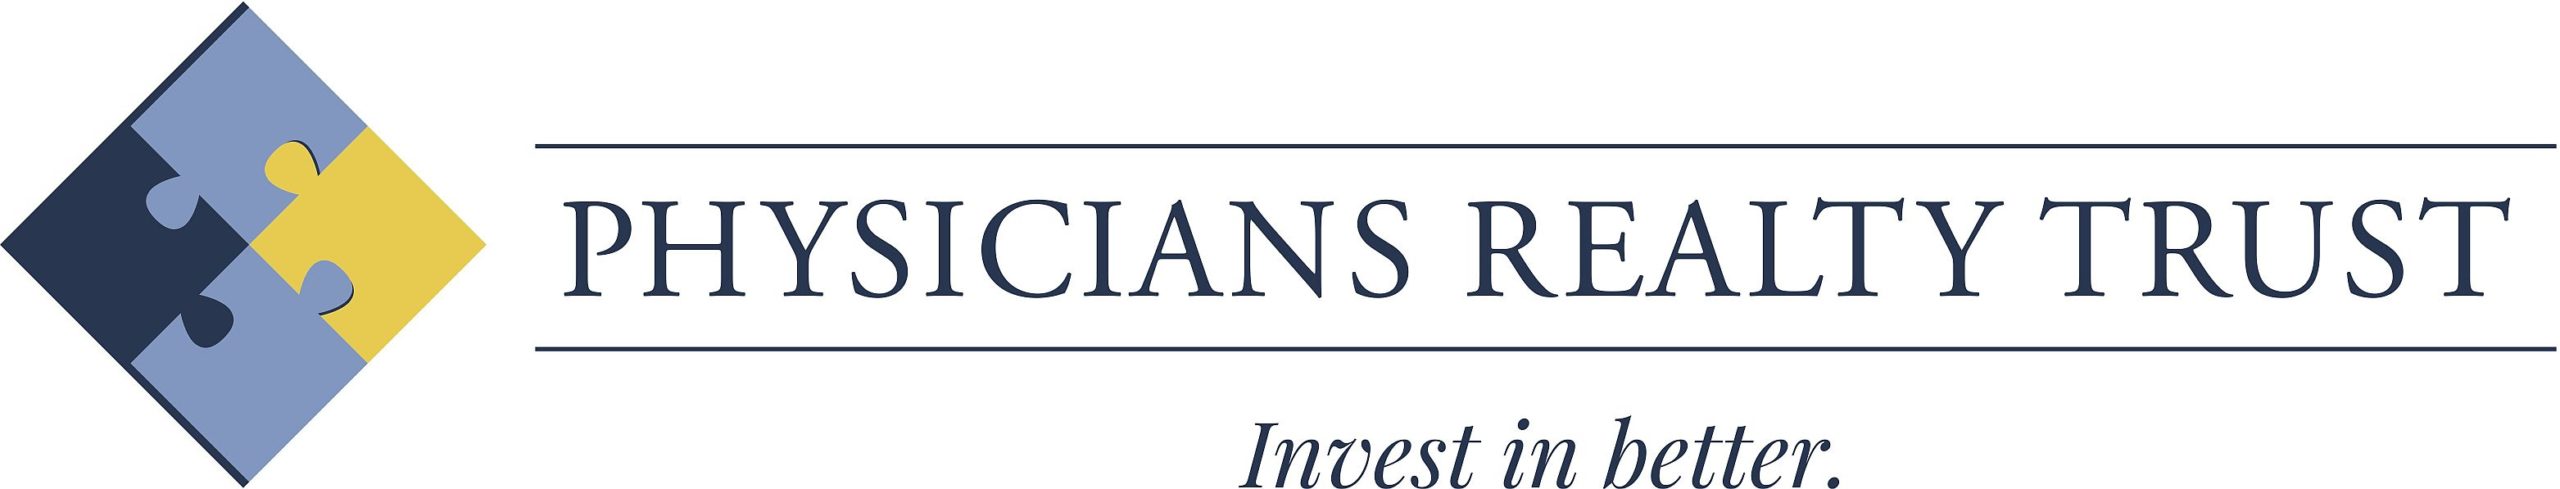 Physicians Realty Trust logo